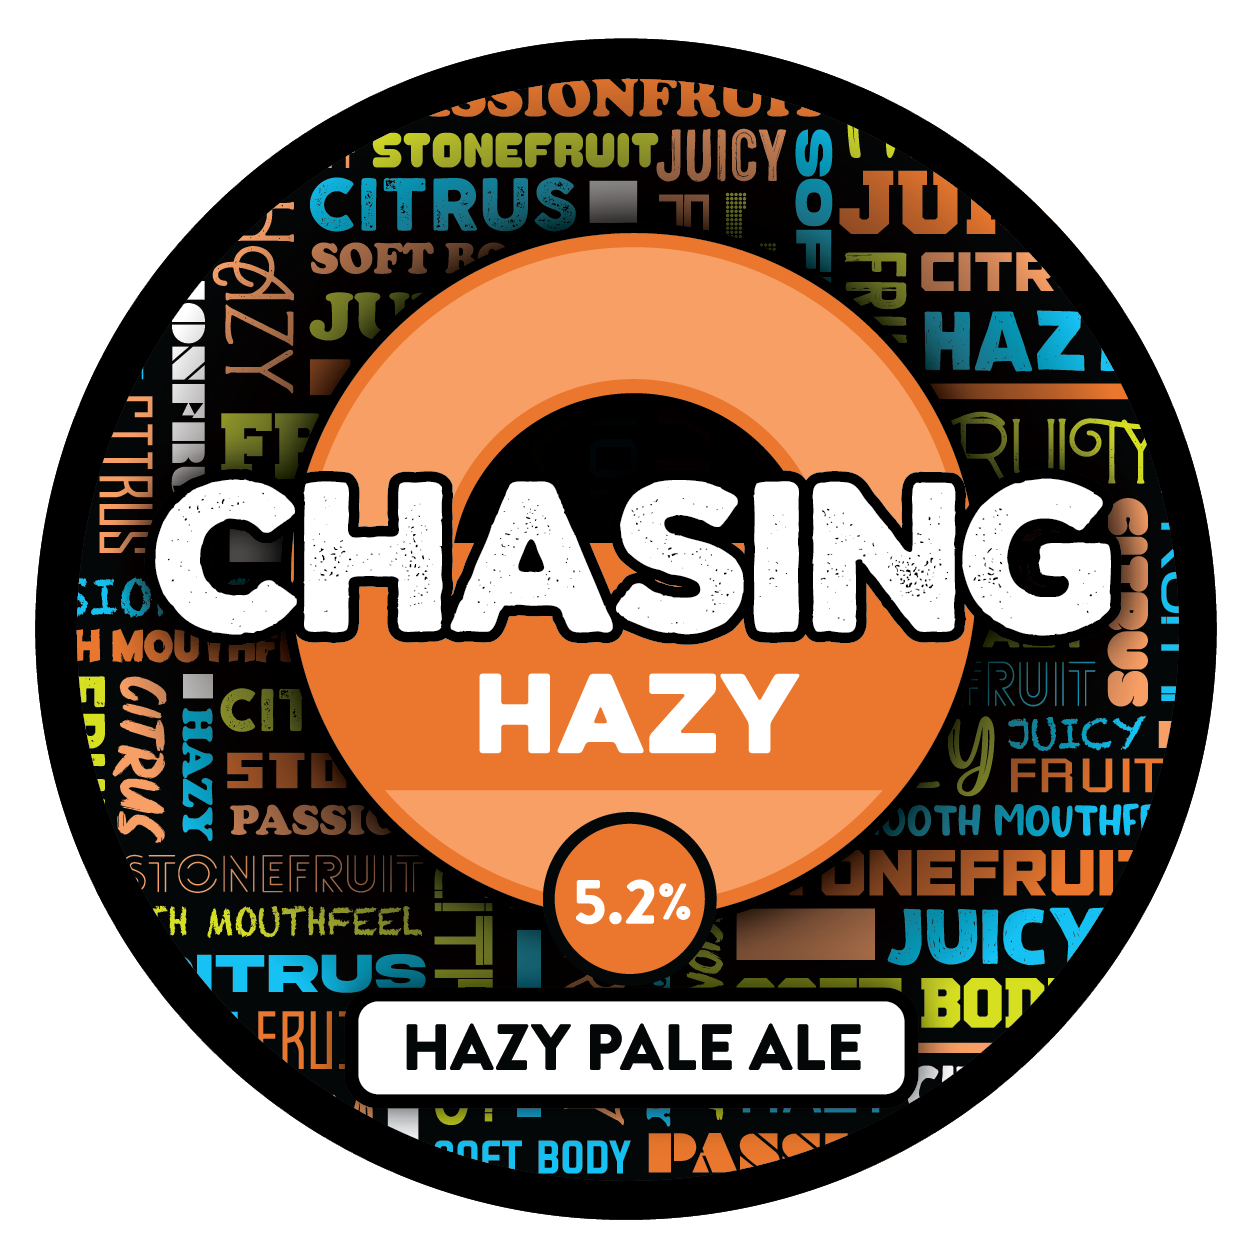 The tap badge for Sprig and Fern's Chasing Hazy Pale Ale craft beer